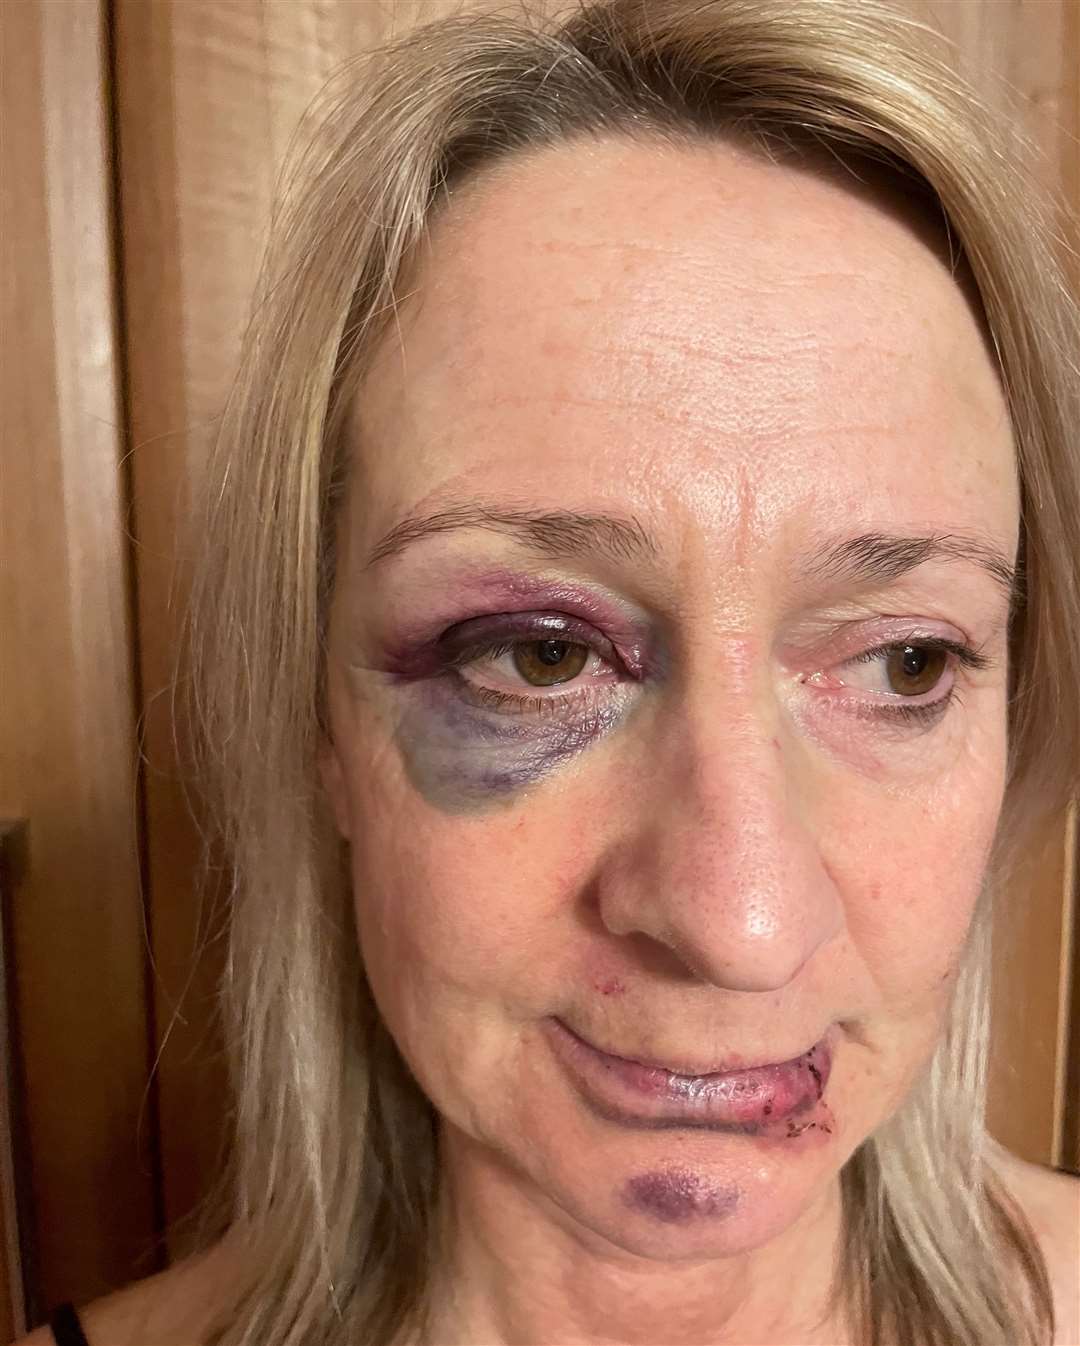 Shocking pictures show how Debbie Hook, from Deal, was battered black and blue by her sister-in-law Emma Varrall